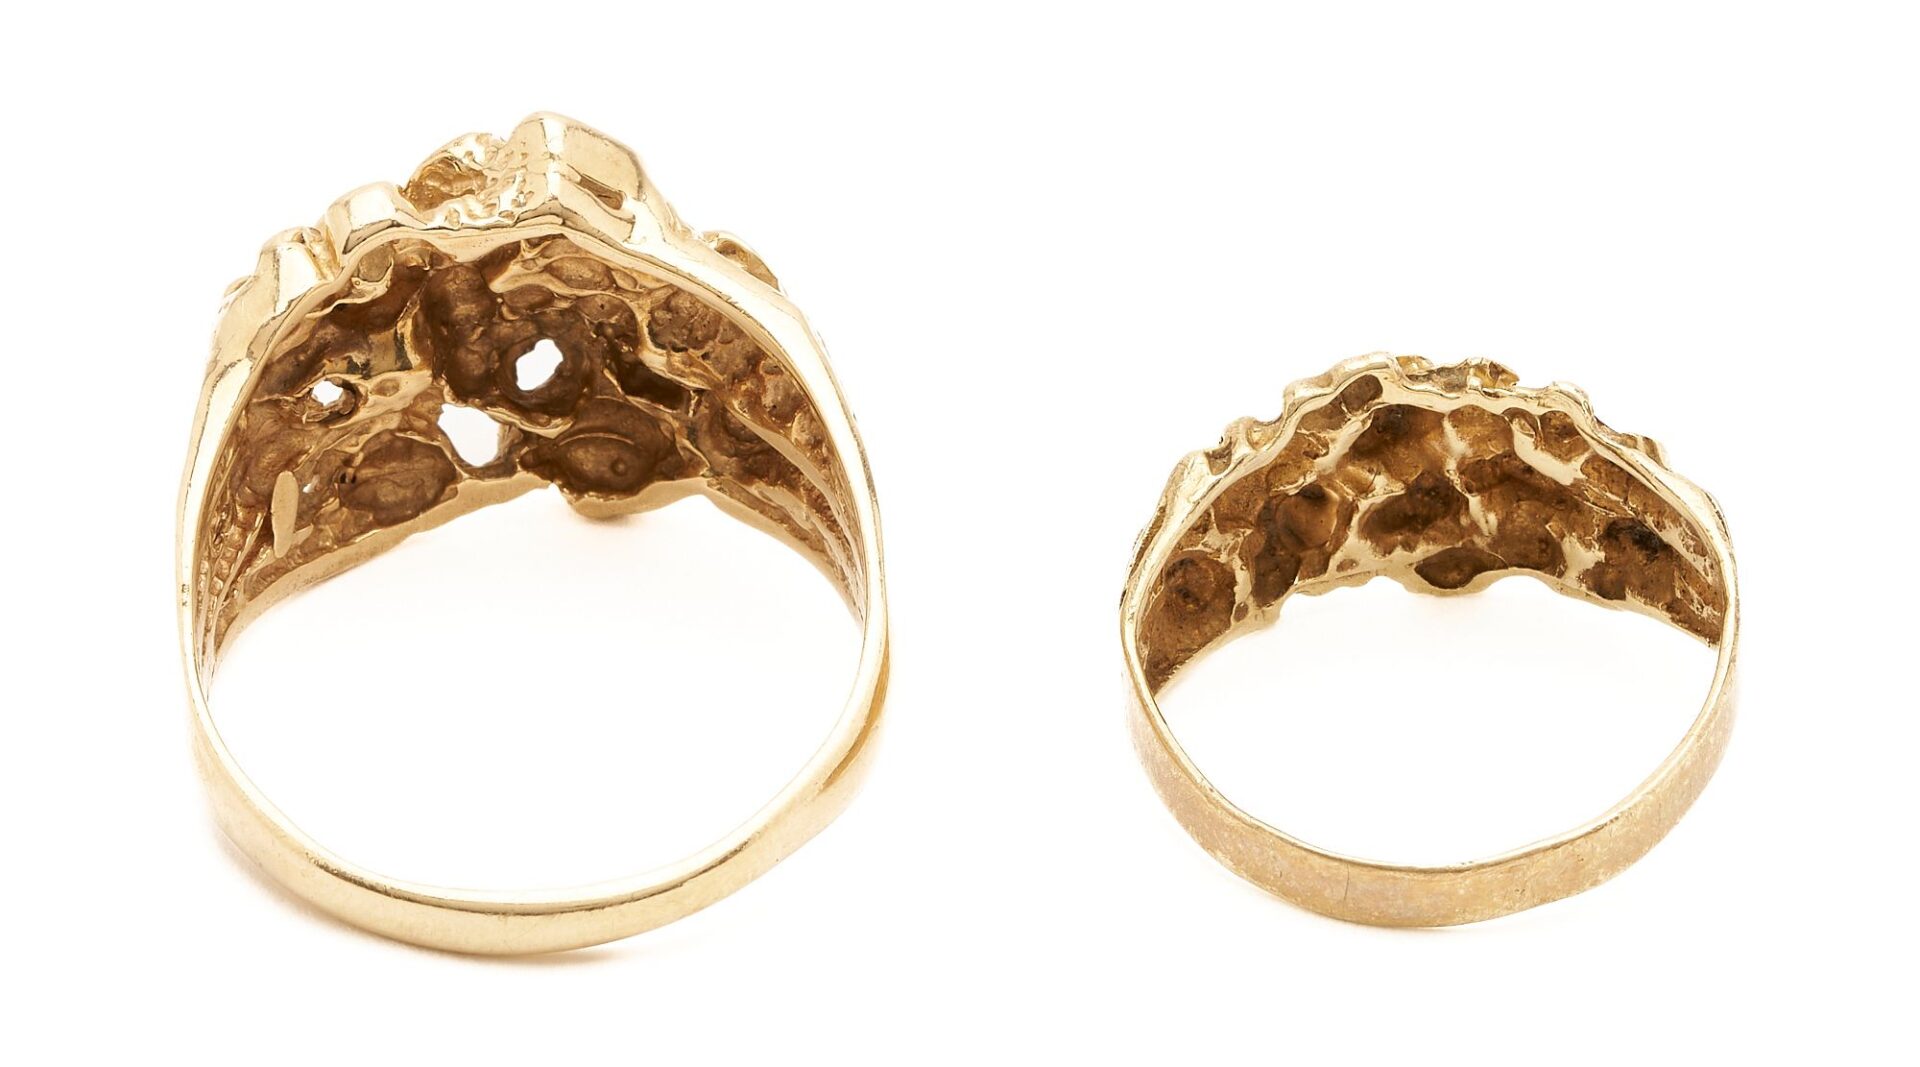 Lot 855: Two (2) Gold Nugget Rings – One 14K Gold & One 10K Gold